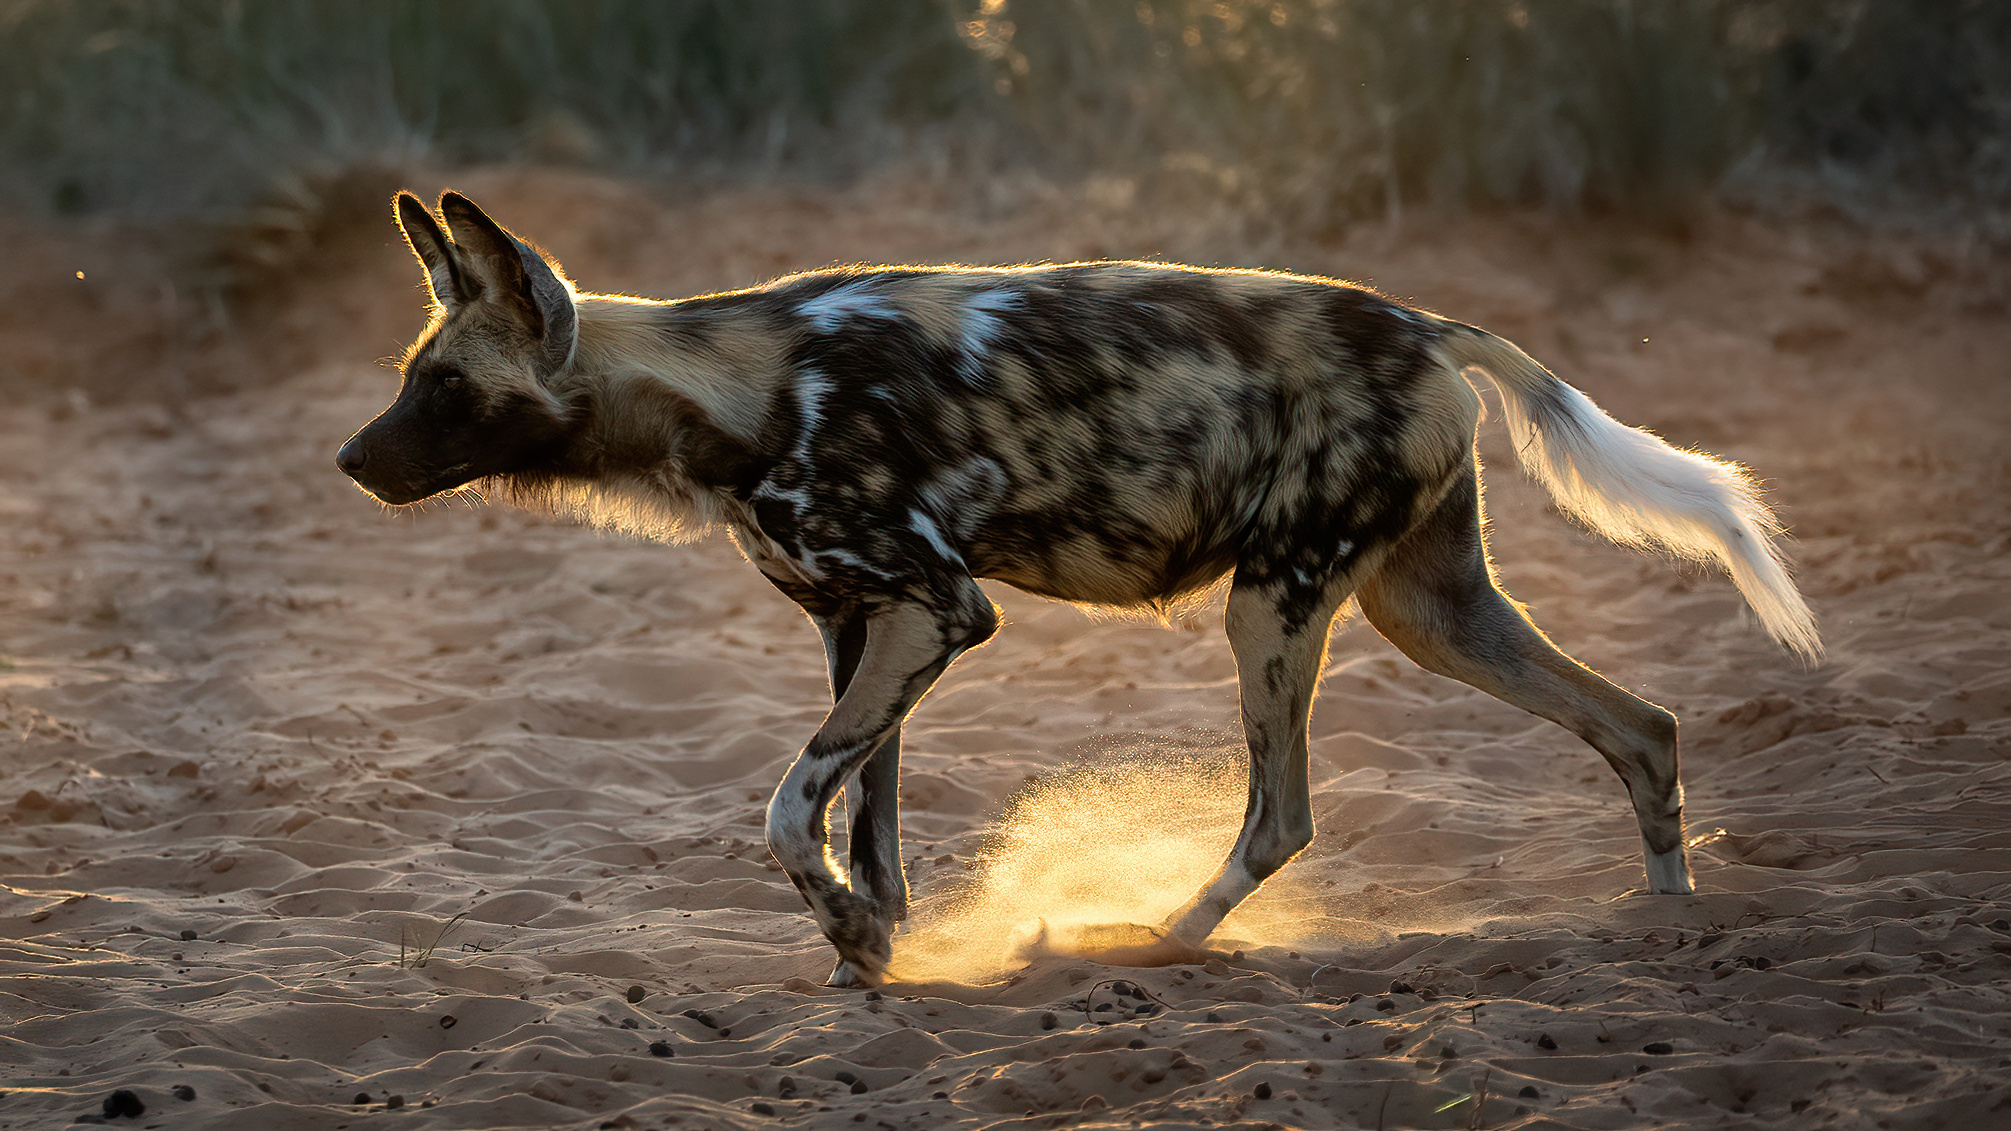 Www Dog And Gril Fast Time Blood Sex Video - African wild dog - Wikipedia